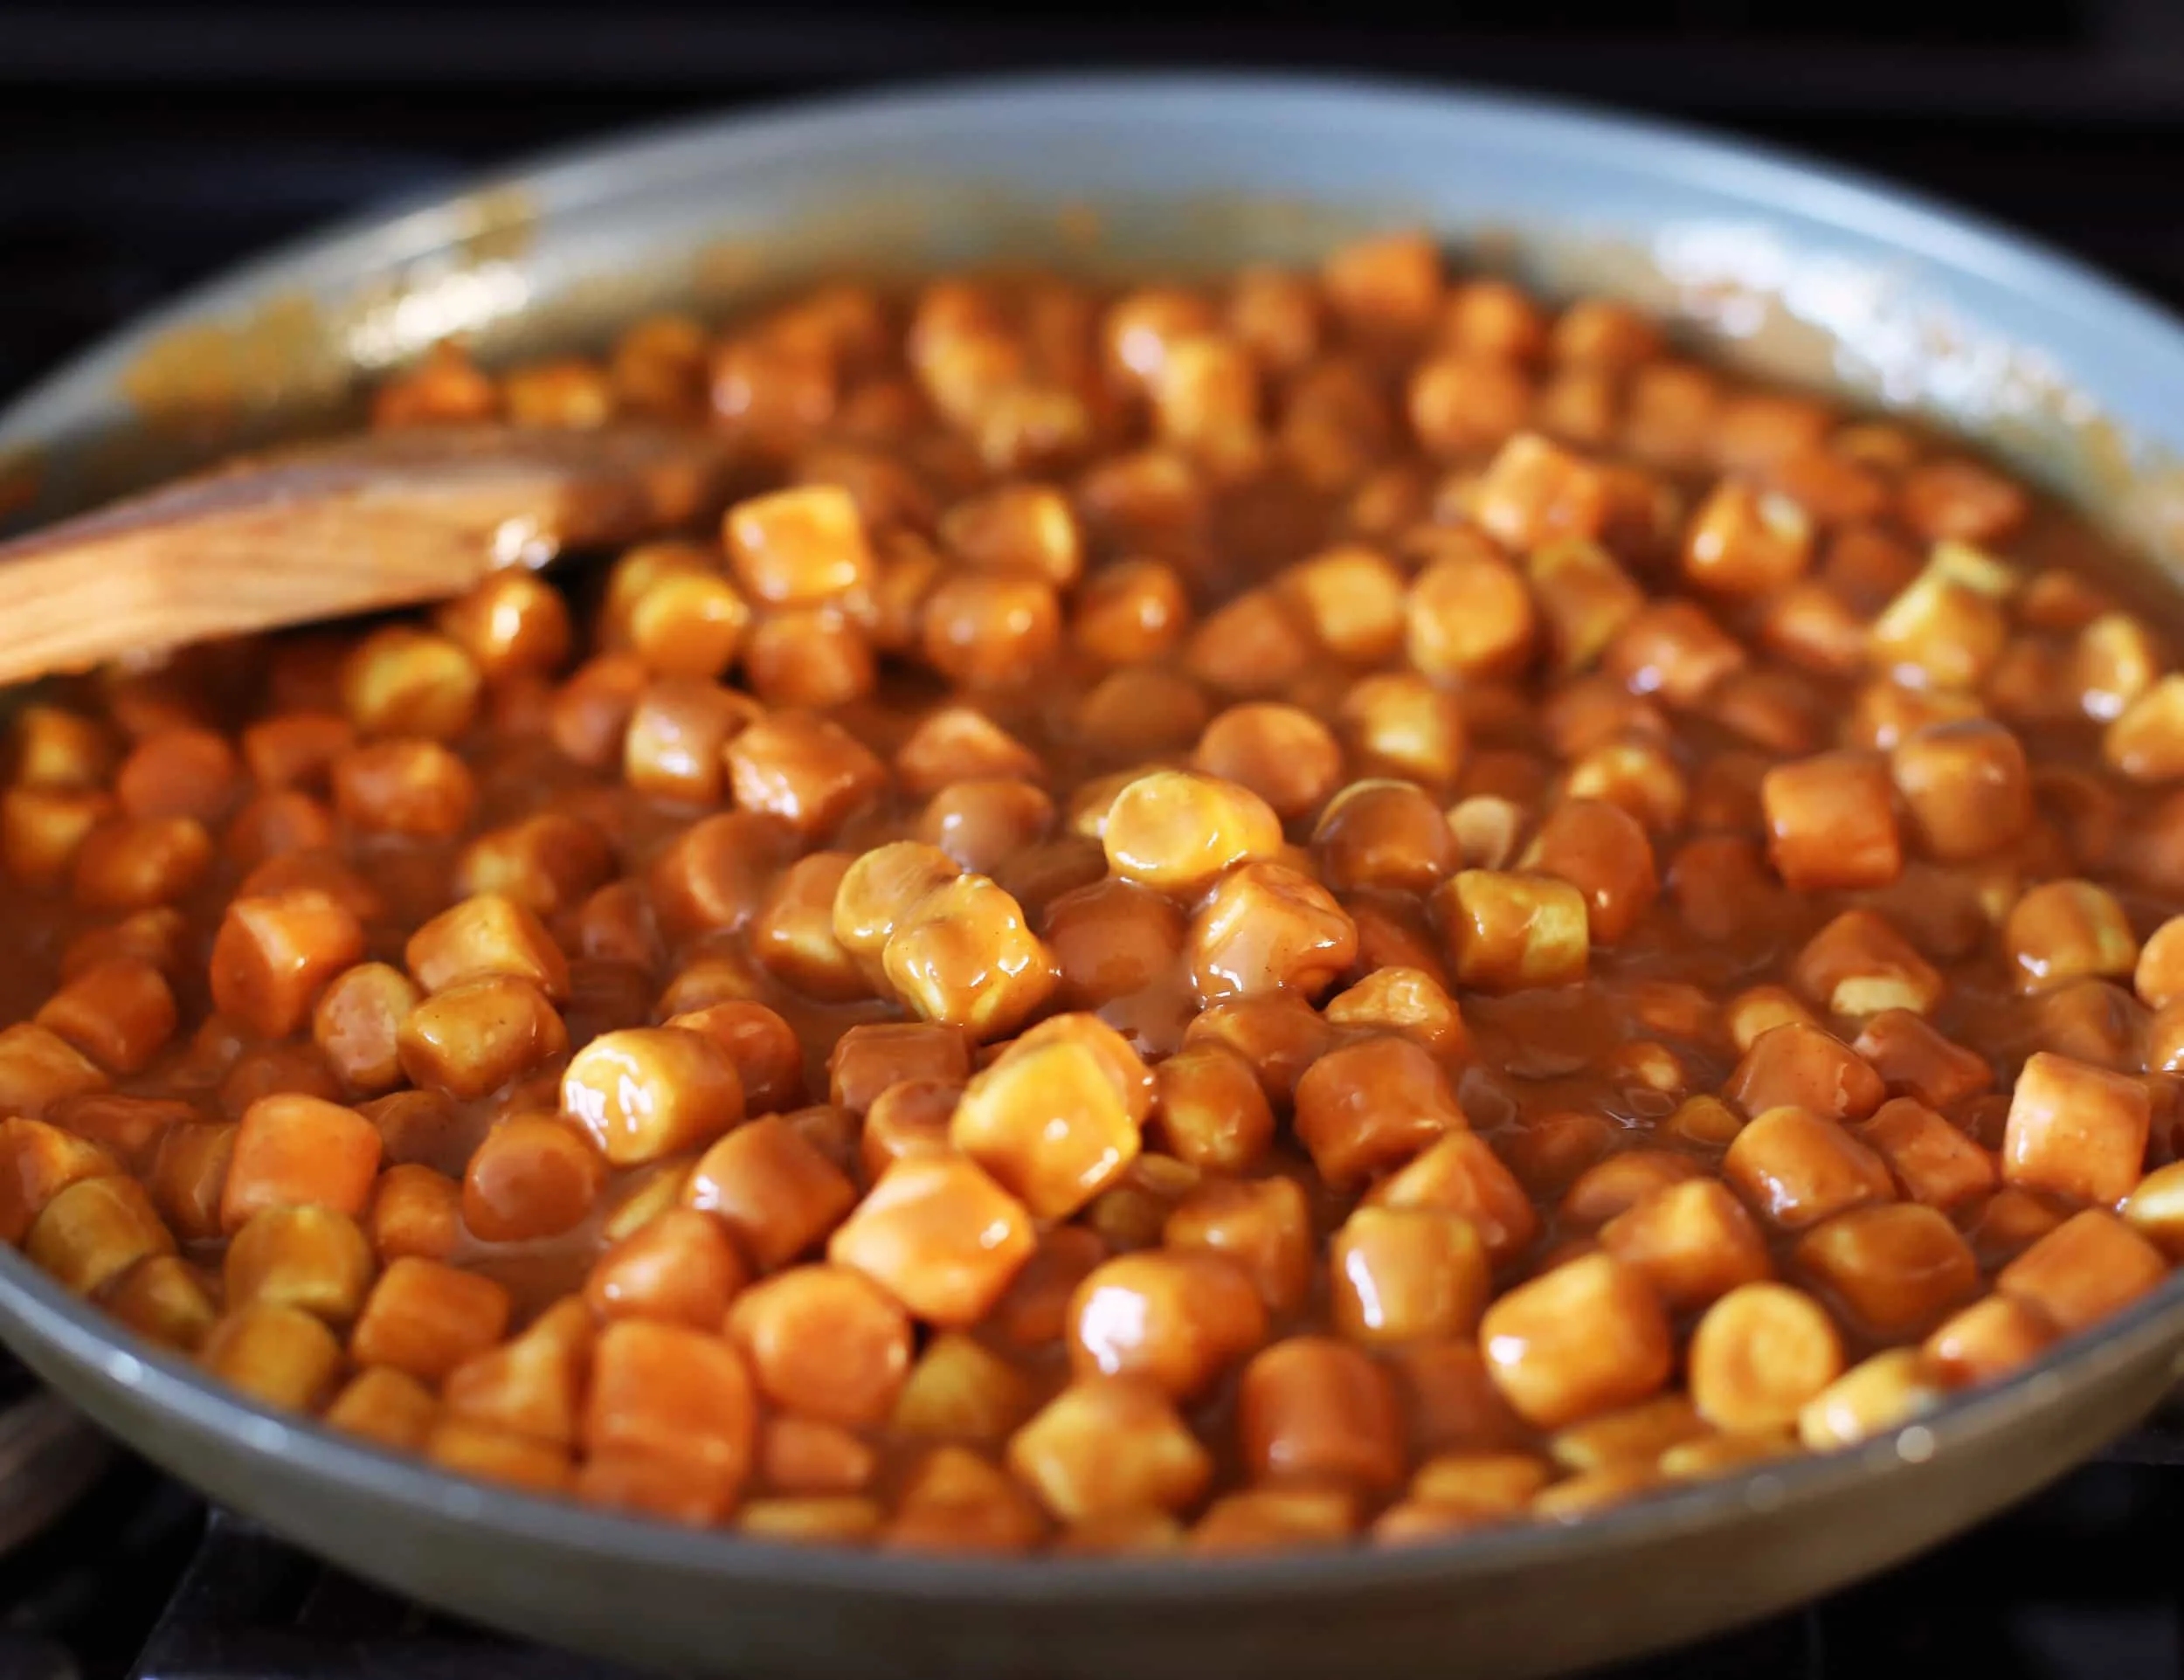 A mixture of peanut butter, butter, butterscotch chips, and marshmallows in a large frying pan.